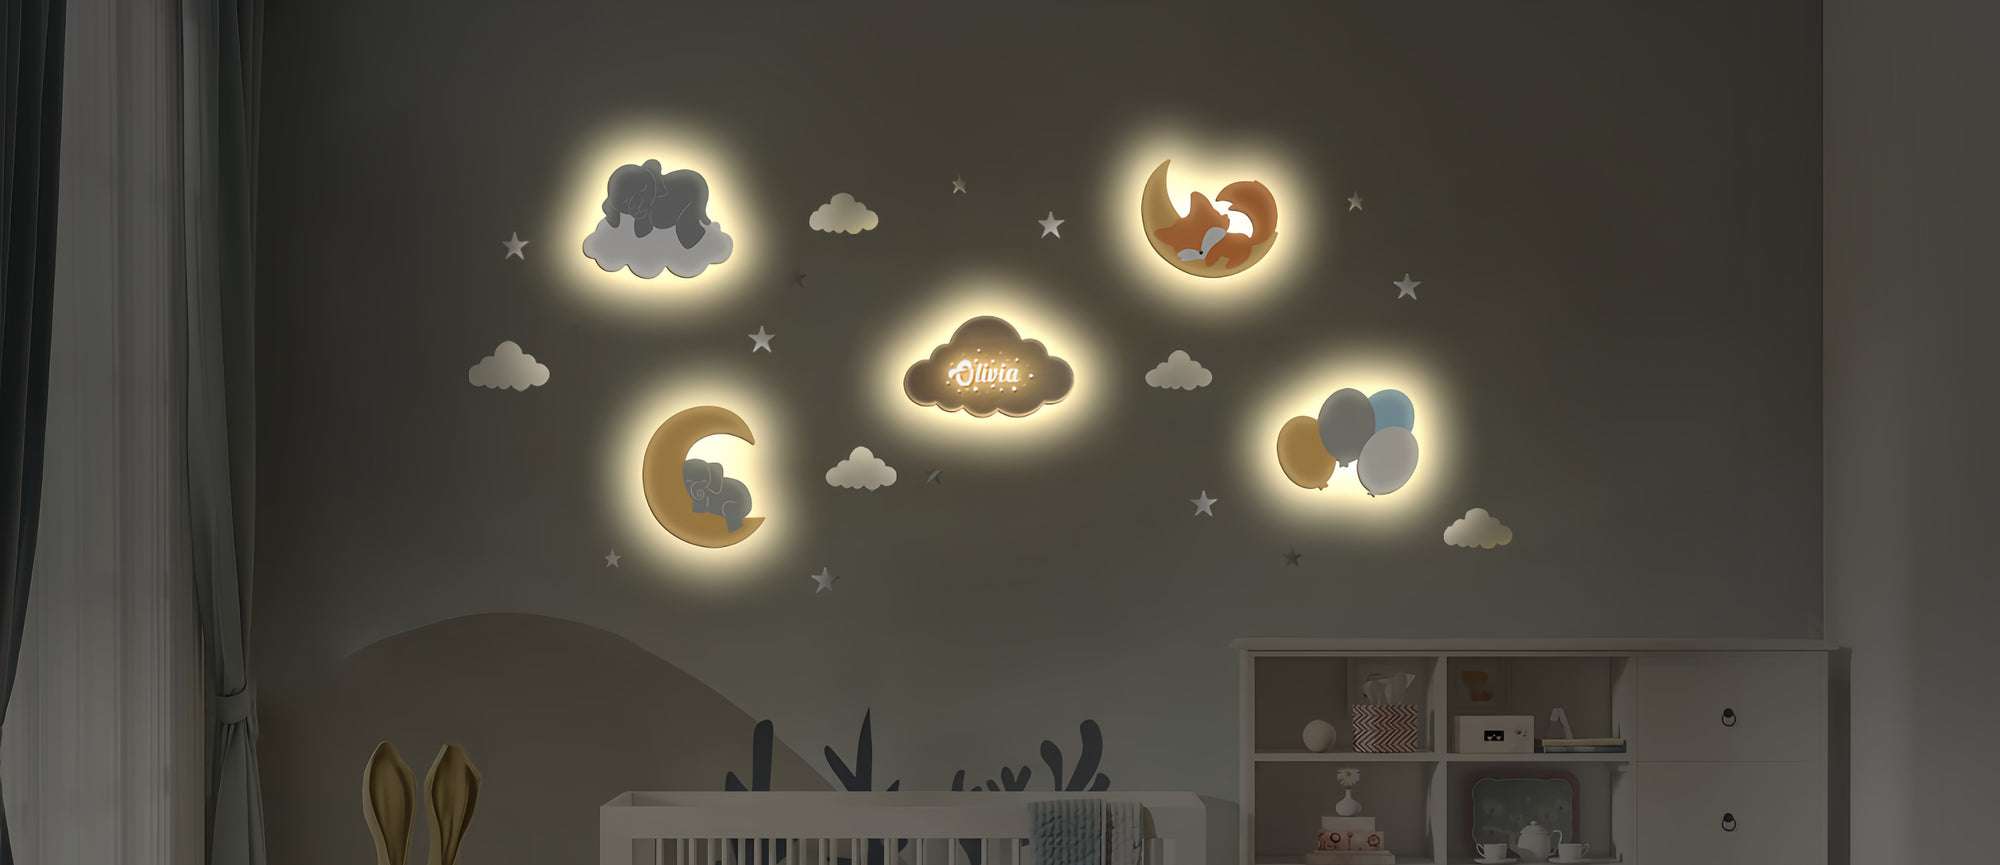 Personalized Wooden Baby's Room Wall Light Set - Night